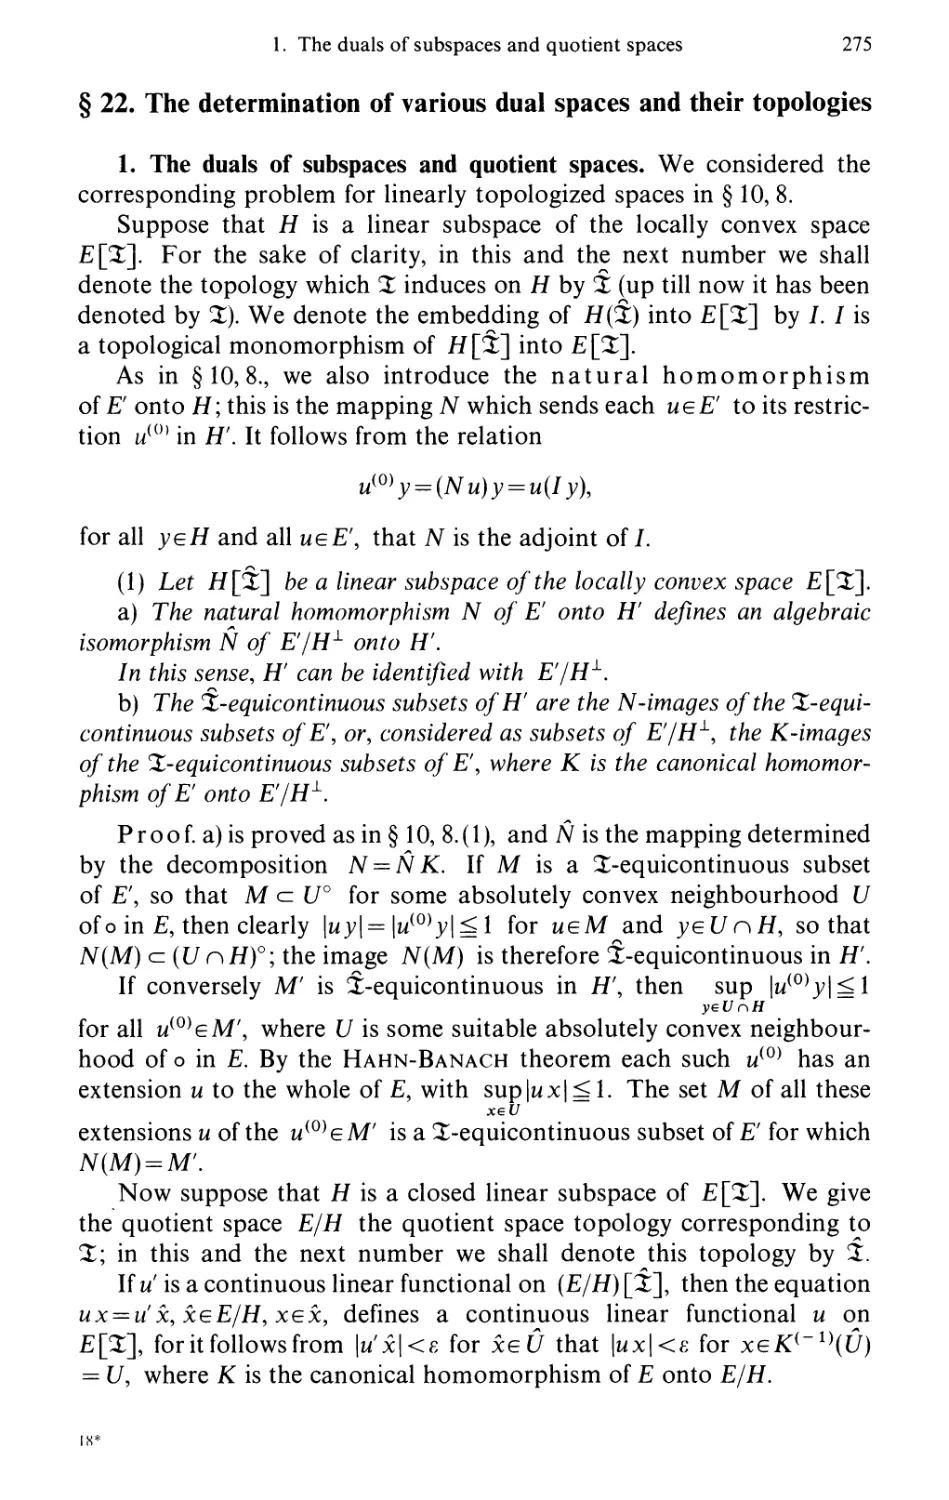 §22. The determination of various dual spaces and their topologies